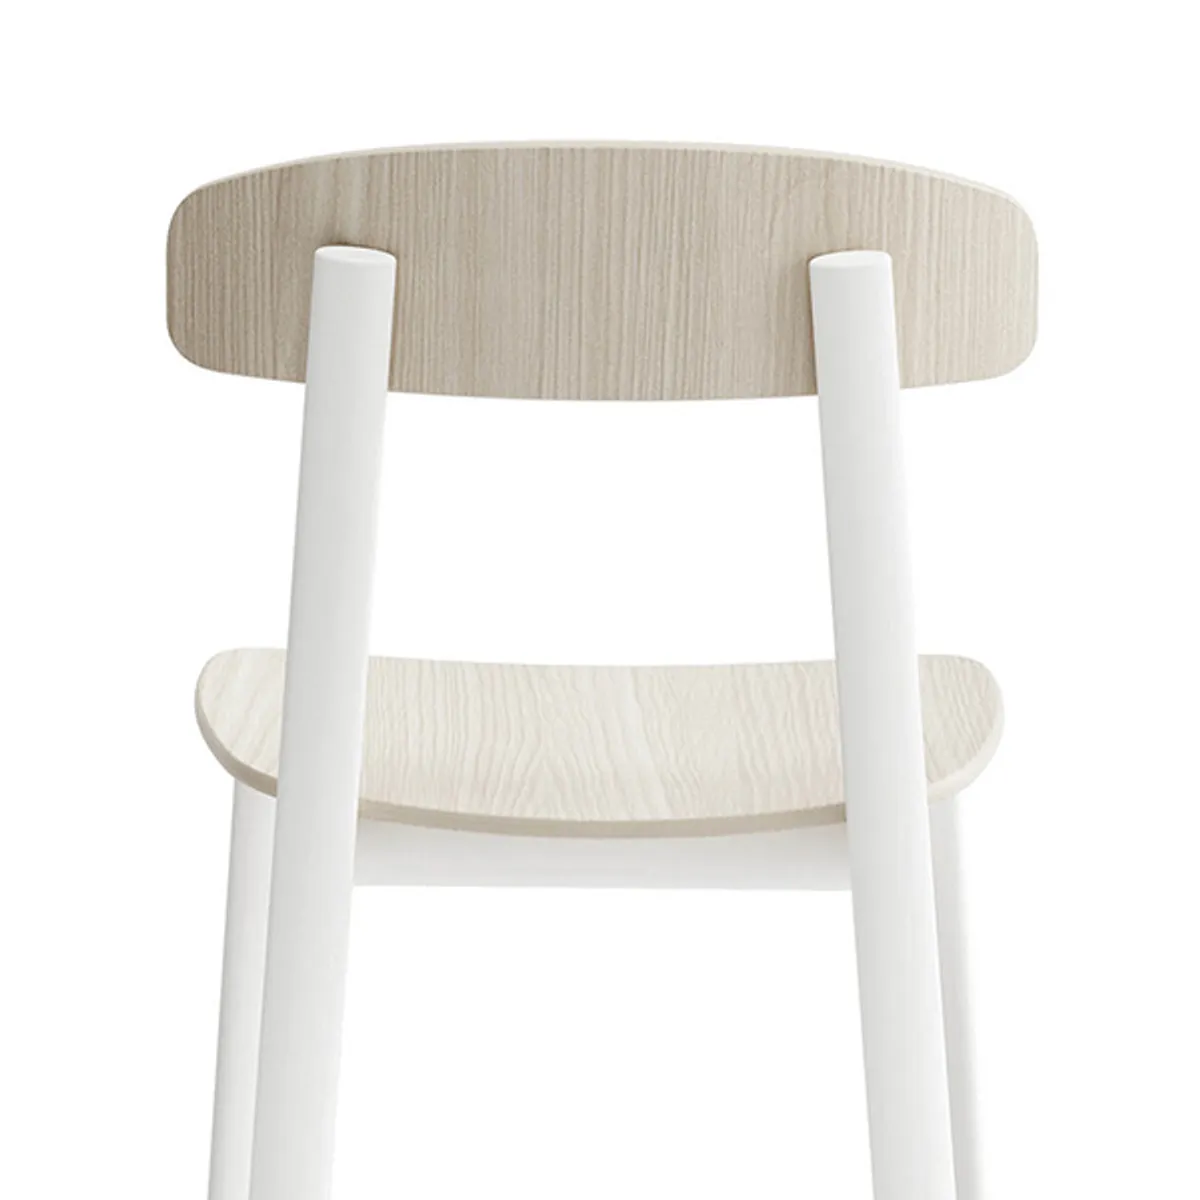 Kipling Chair Plywood Backrest Inside Out Contracts